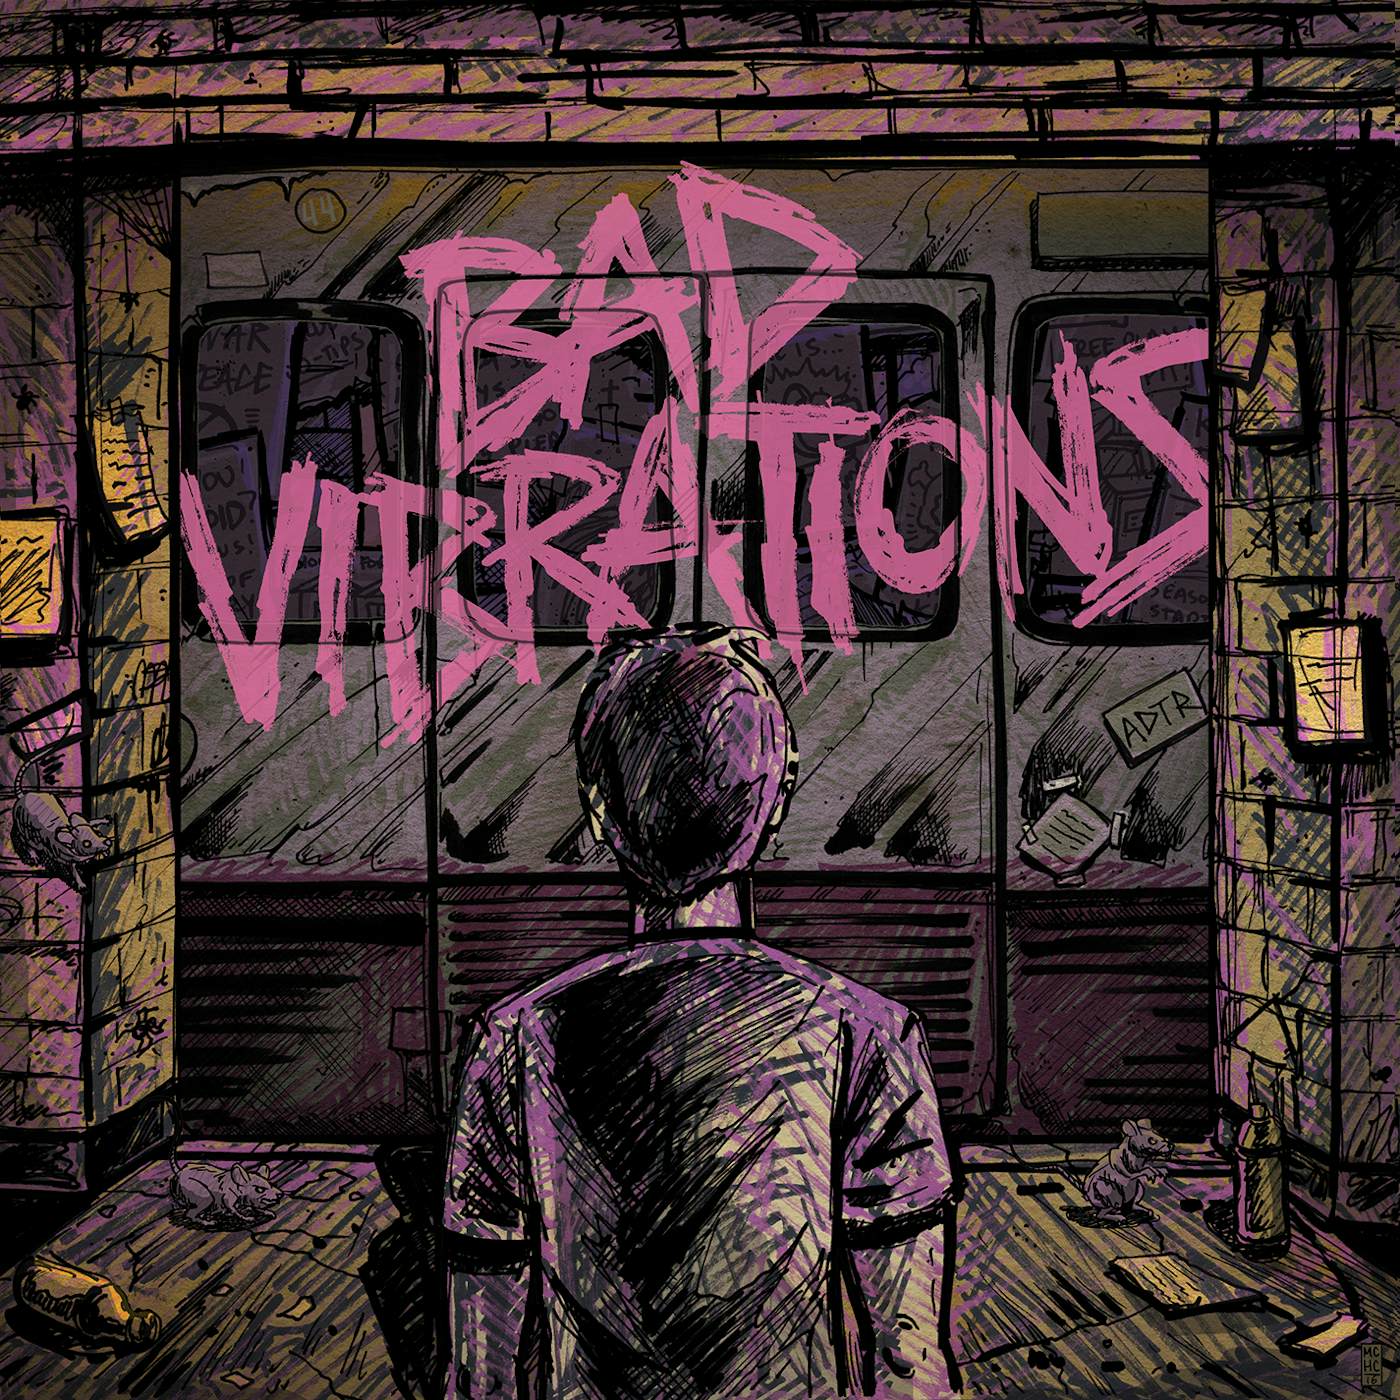 A Day To Remember BAD VIBRATIONS CD